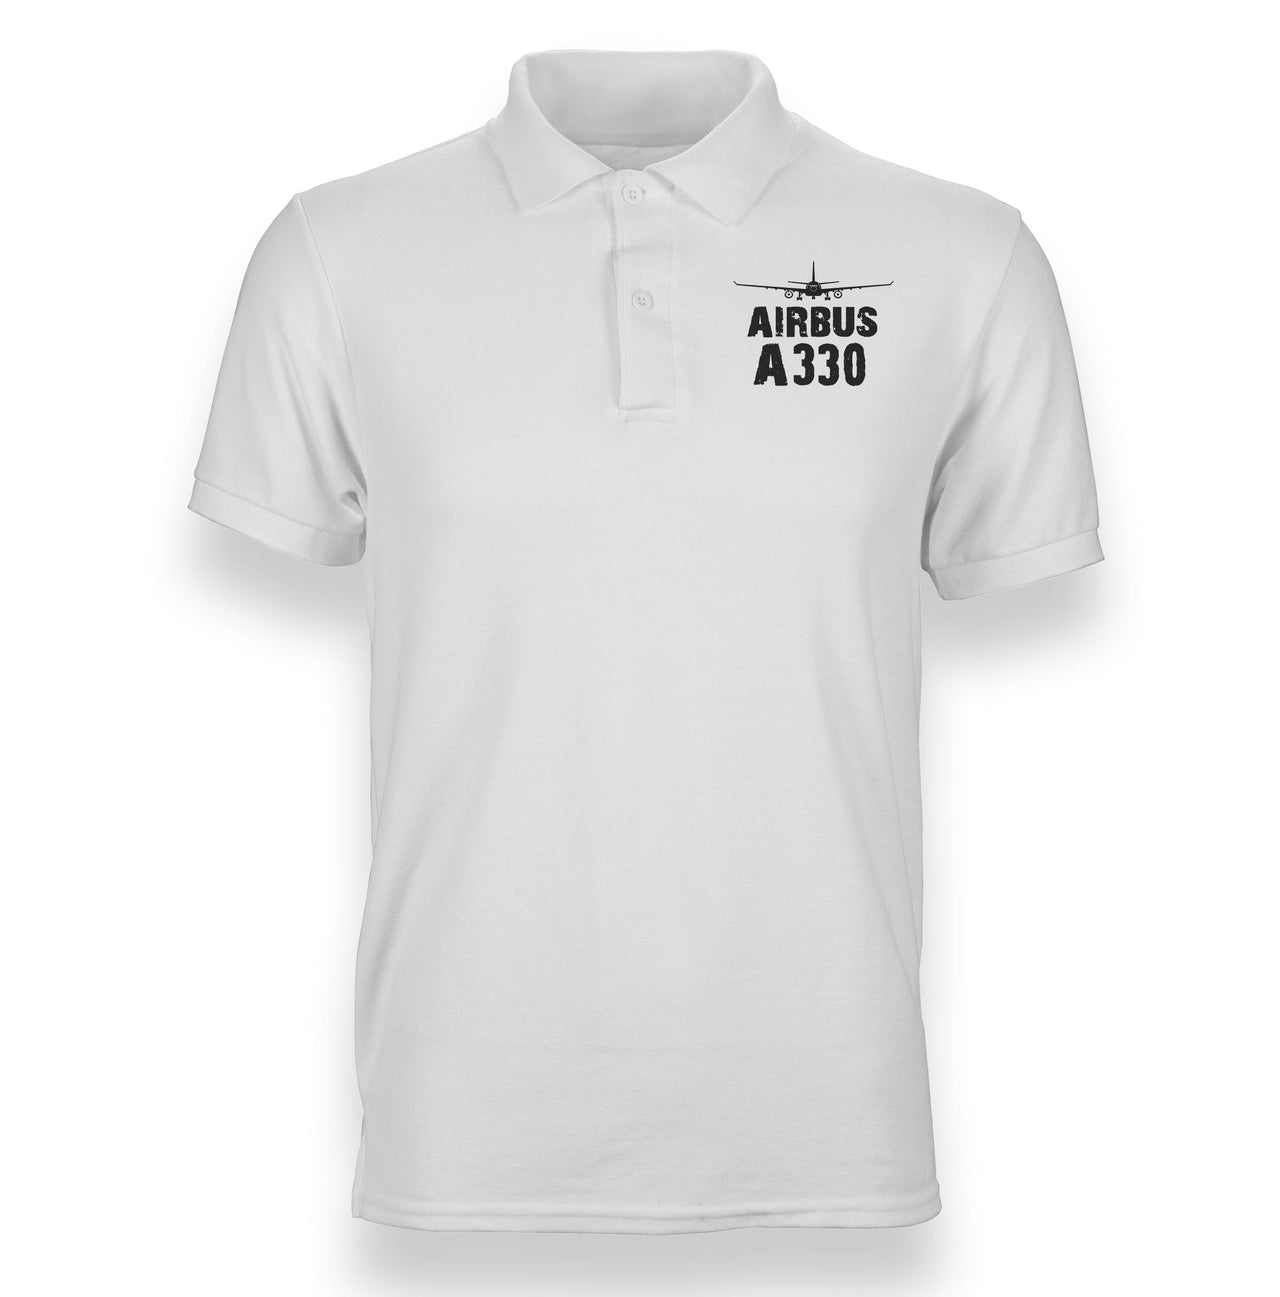 Airbus A330 & Plane Designed Polo T-Shirts